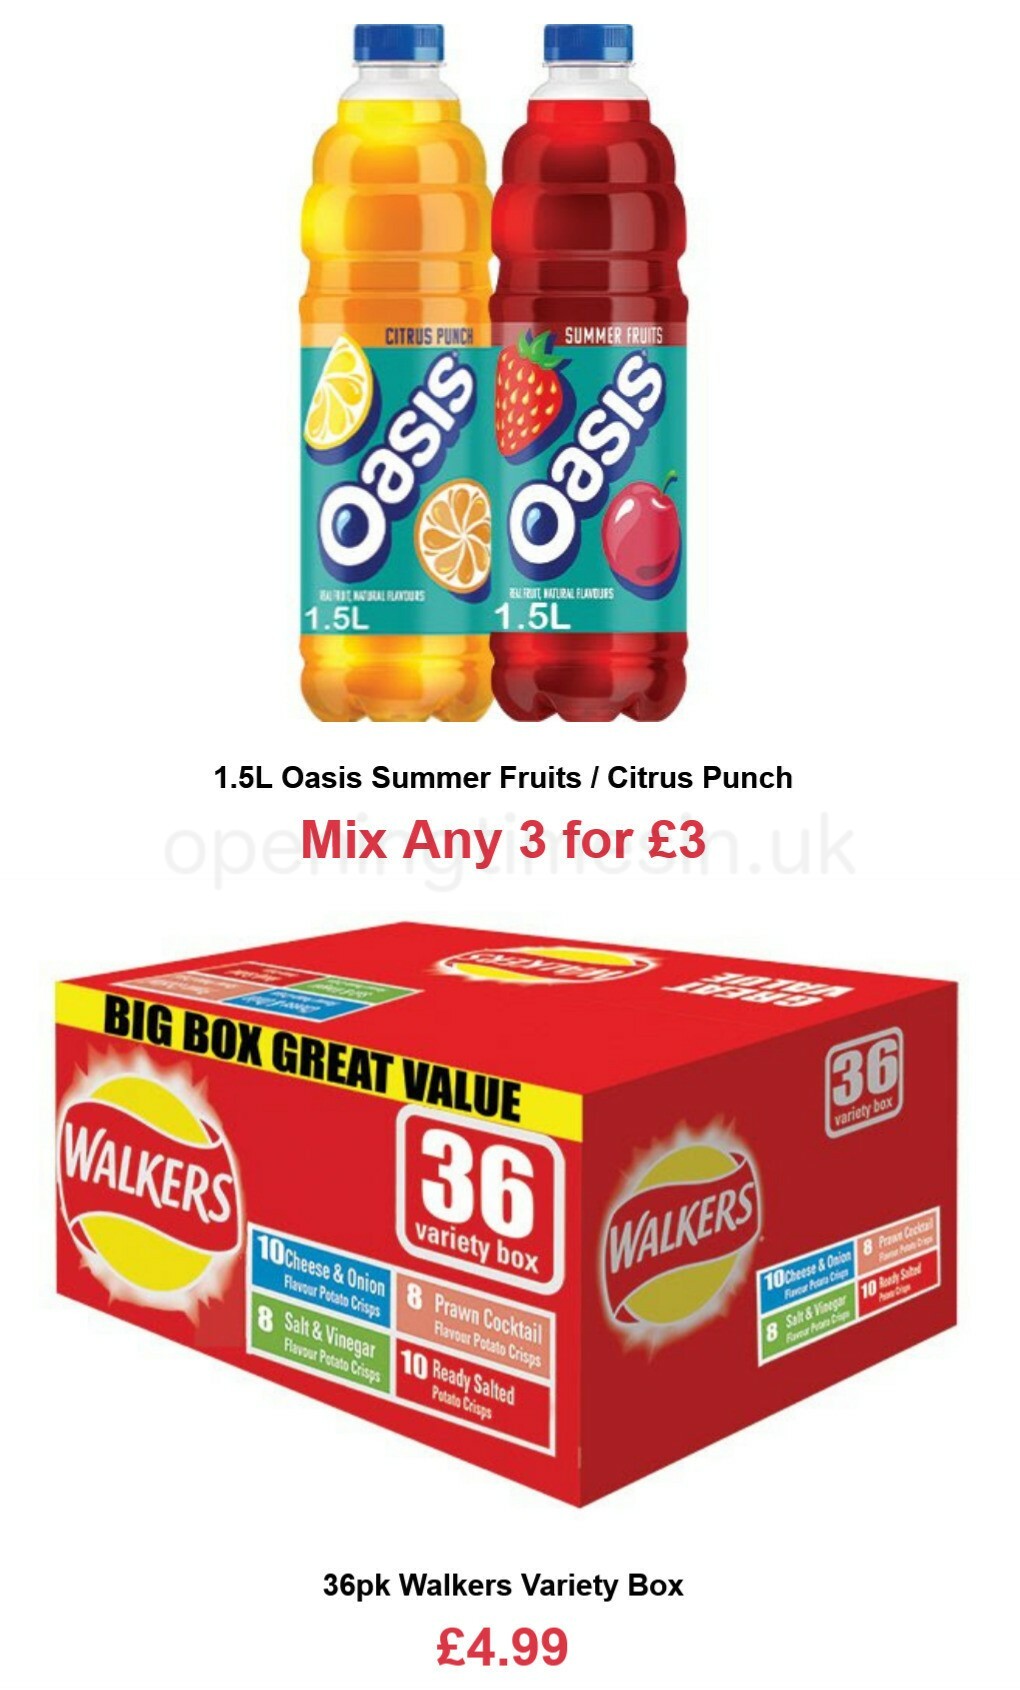 Farmfoods Offers from 3 June